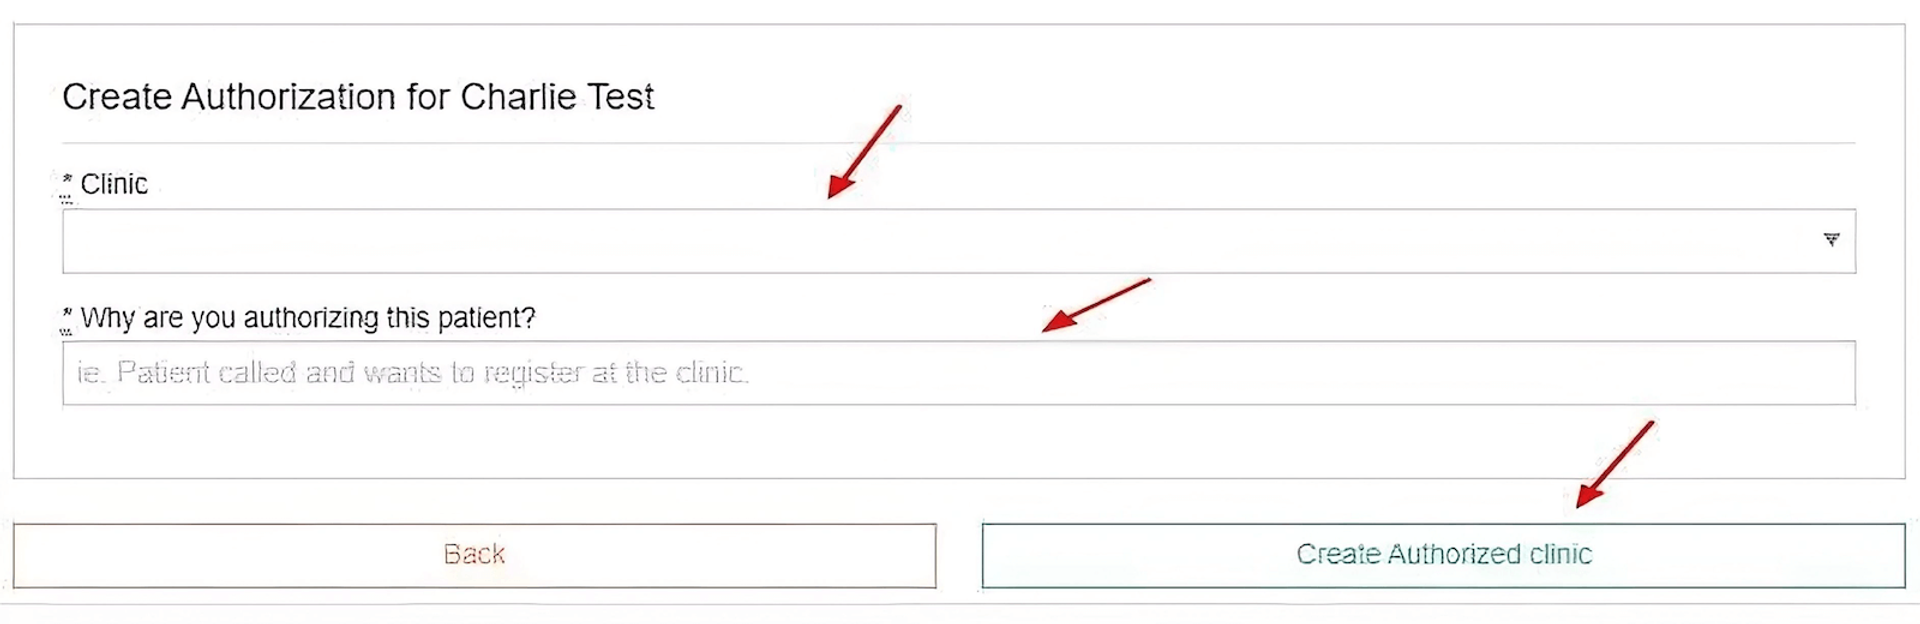 Workspace labeled 'Create Authorization for Charlie Test' with red arrows pointing at form fields and a button labeled 'Create Authorized Clinic'